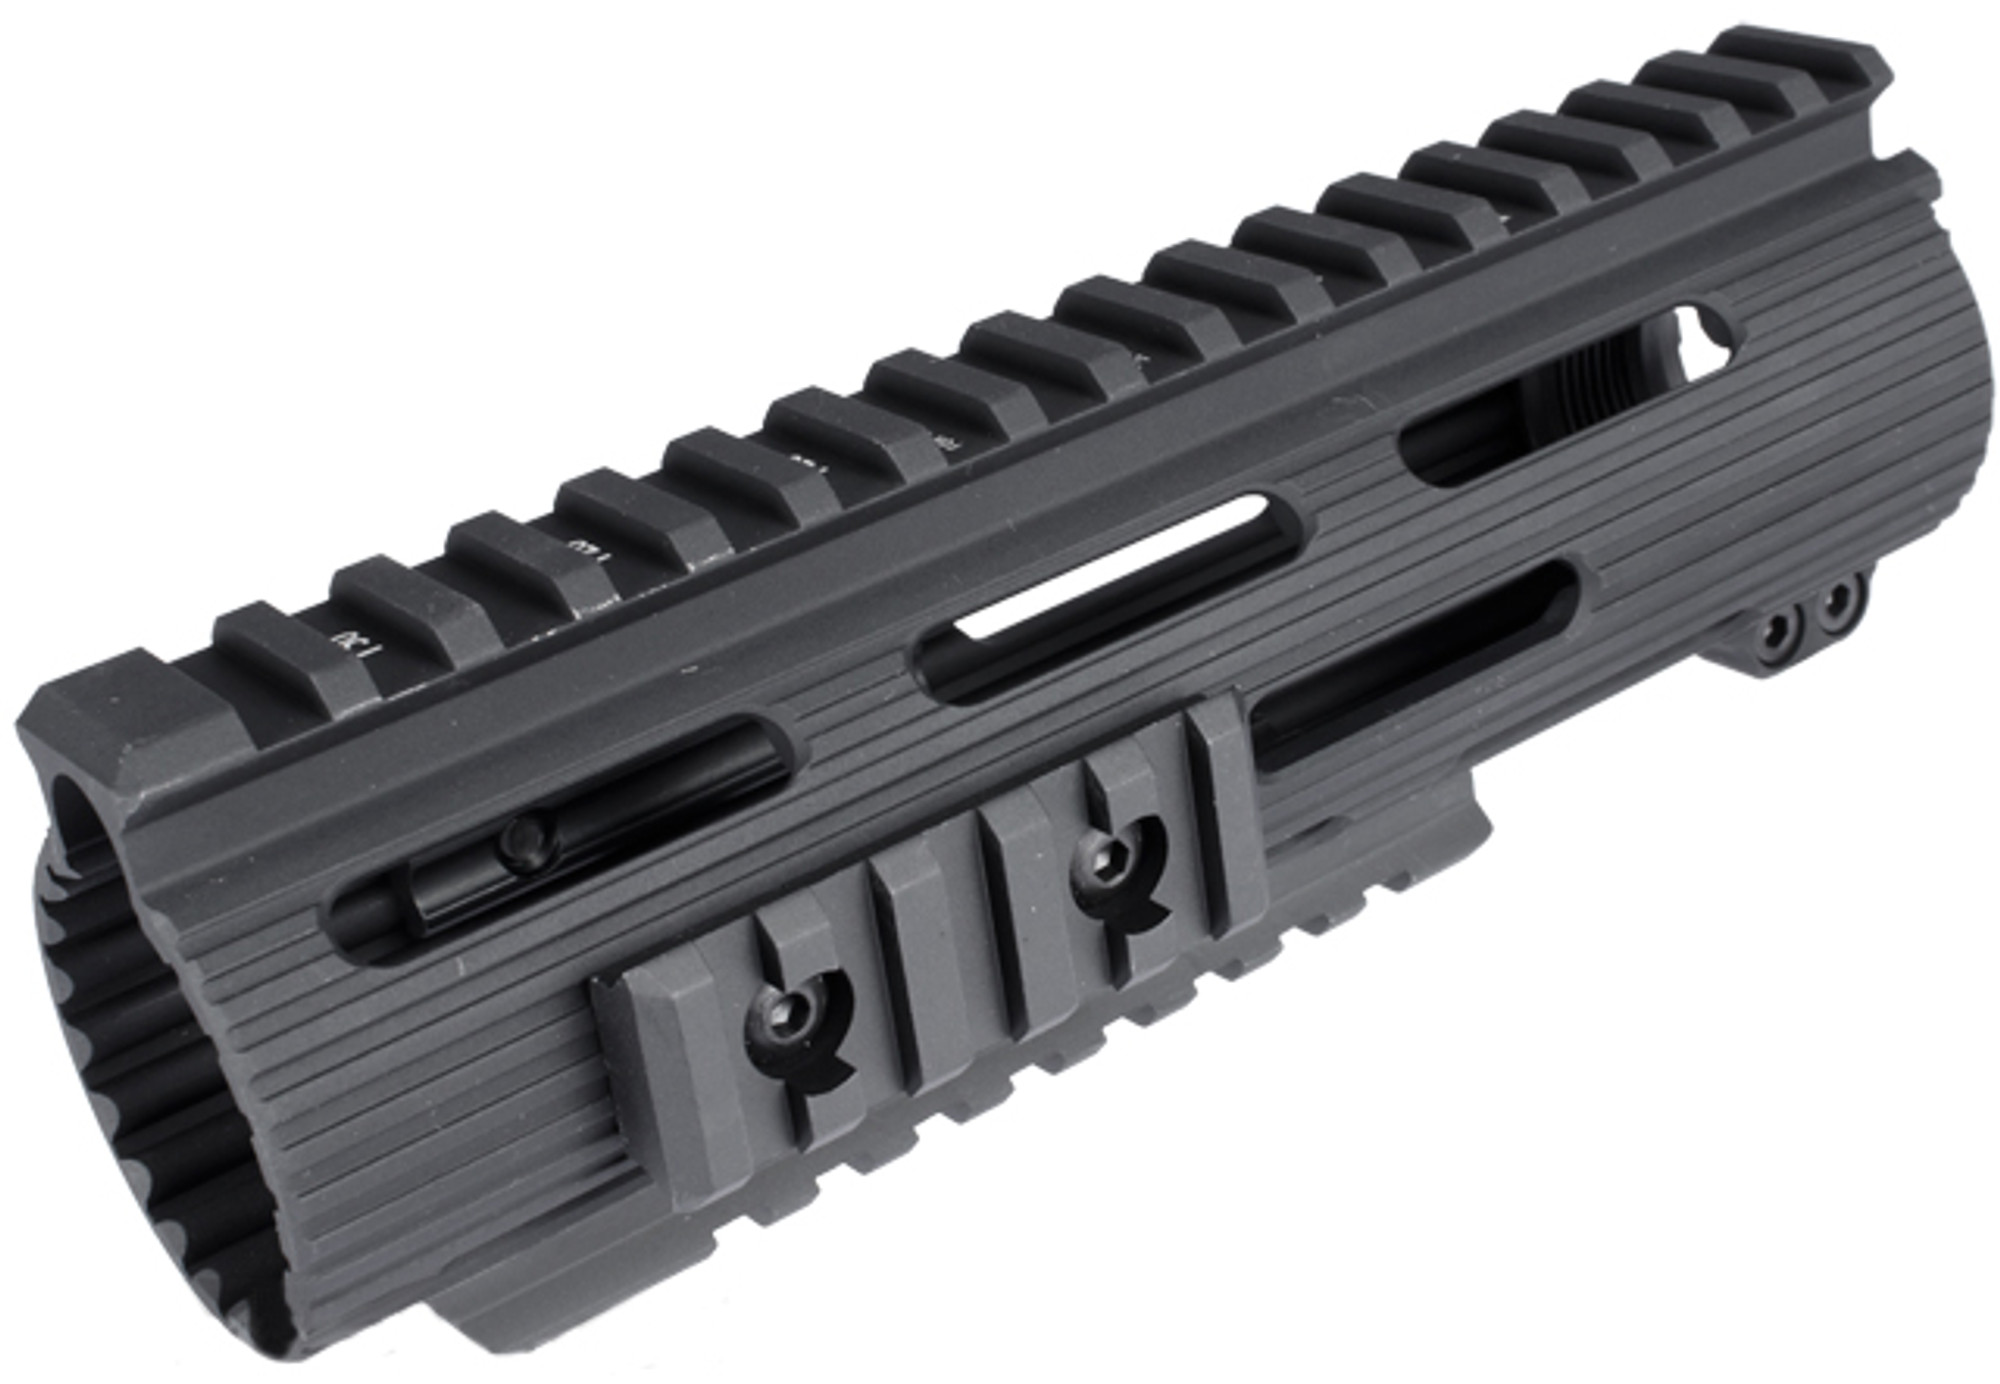 Madbull Airsoft VTAC Extreme Official Licensed Battle Rail 7" for Airsoft M4/M16 Series AEGs (Black)